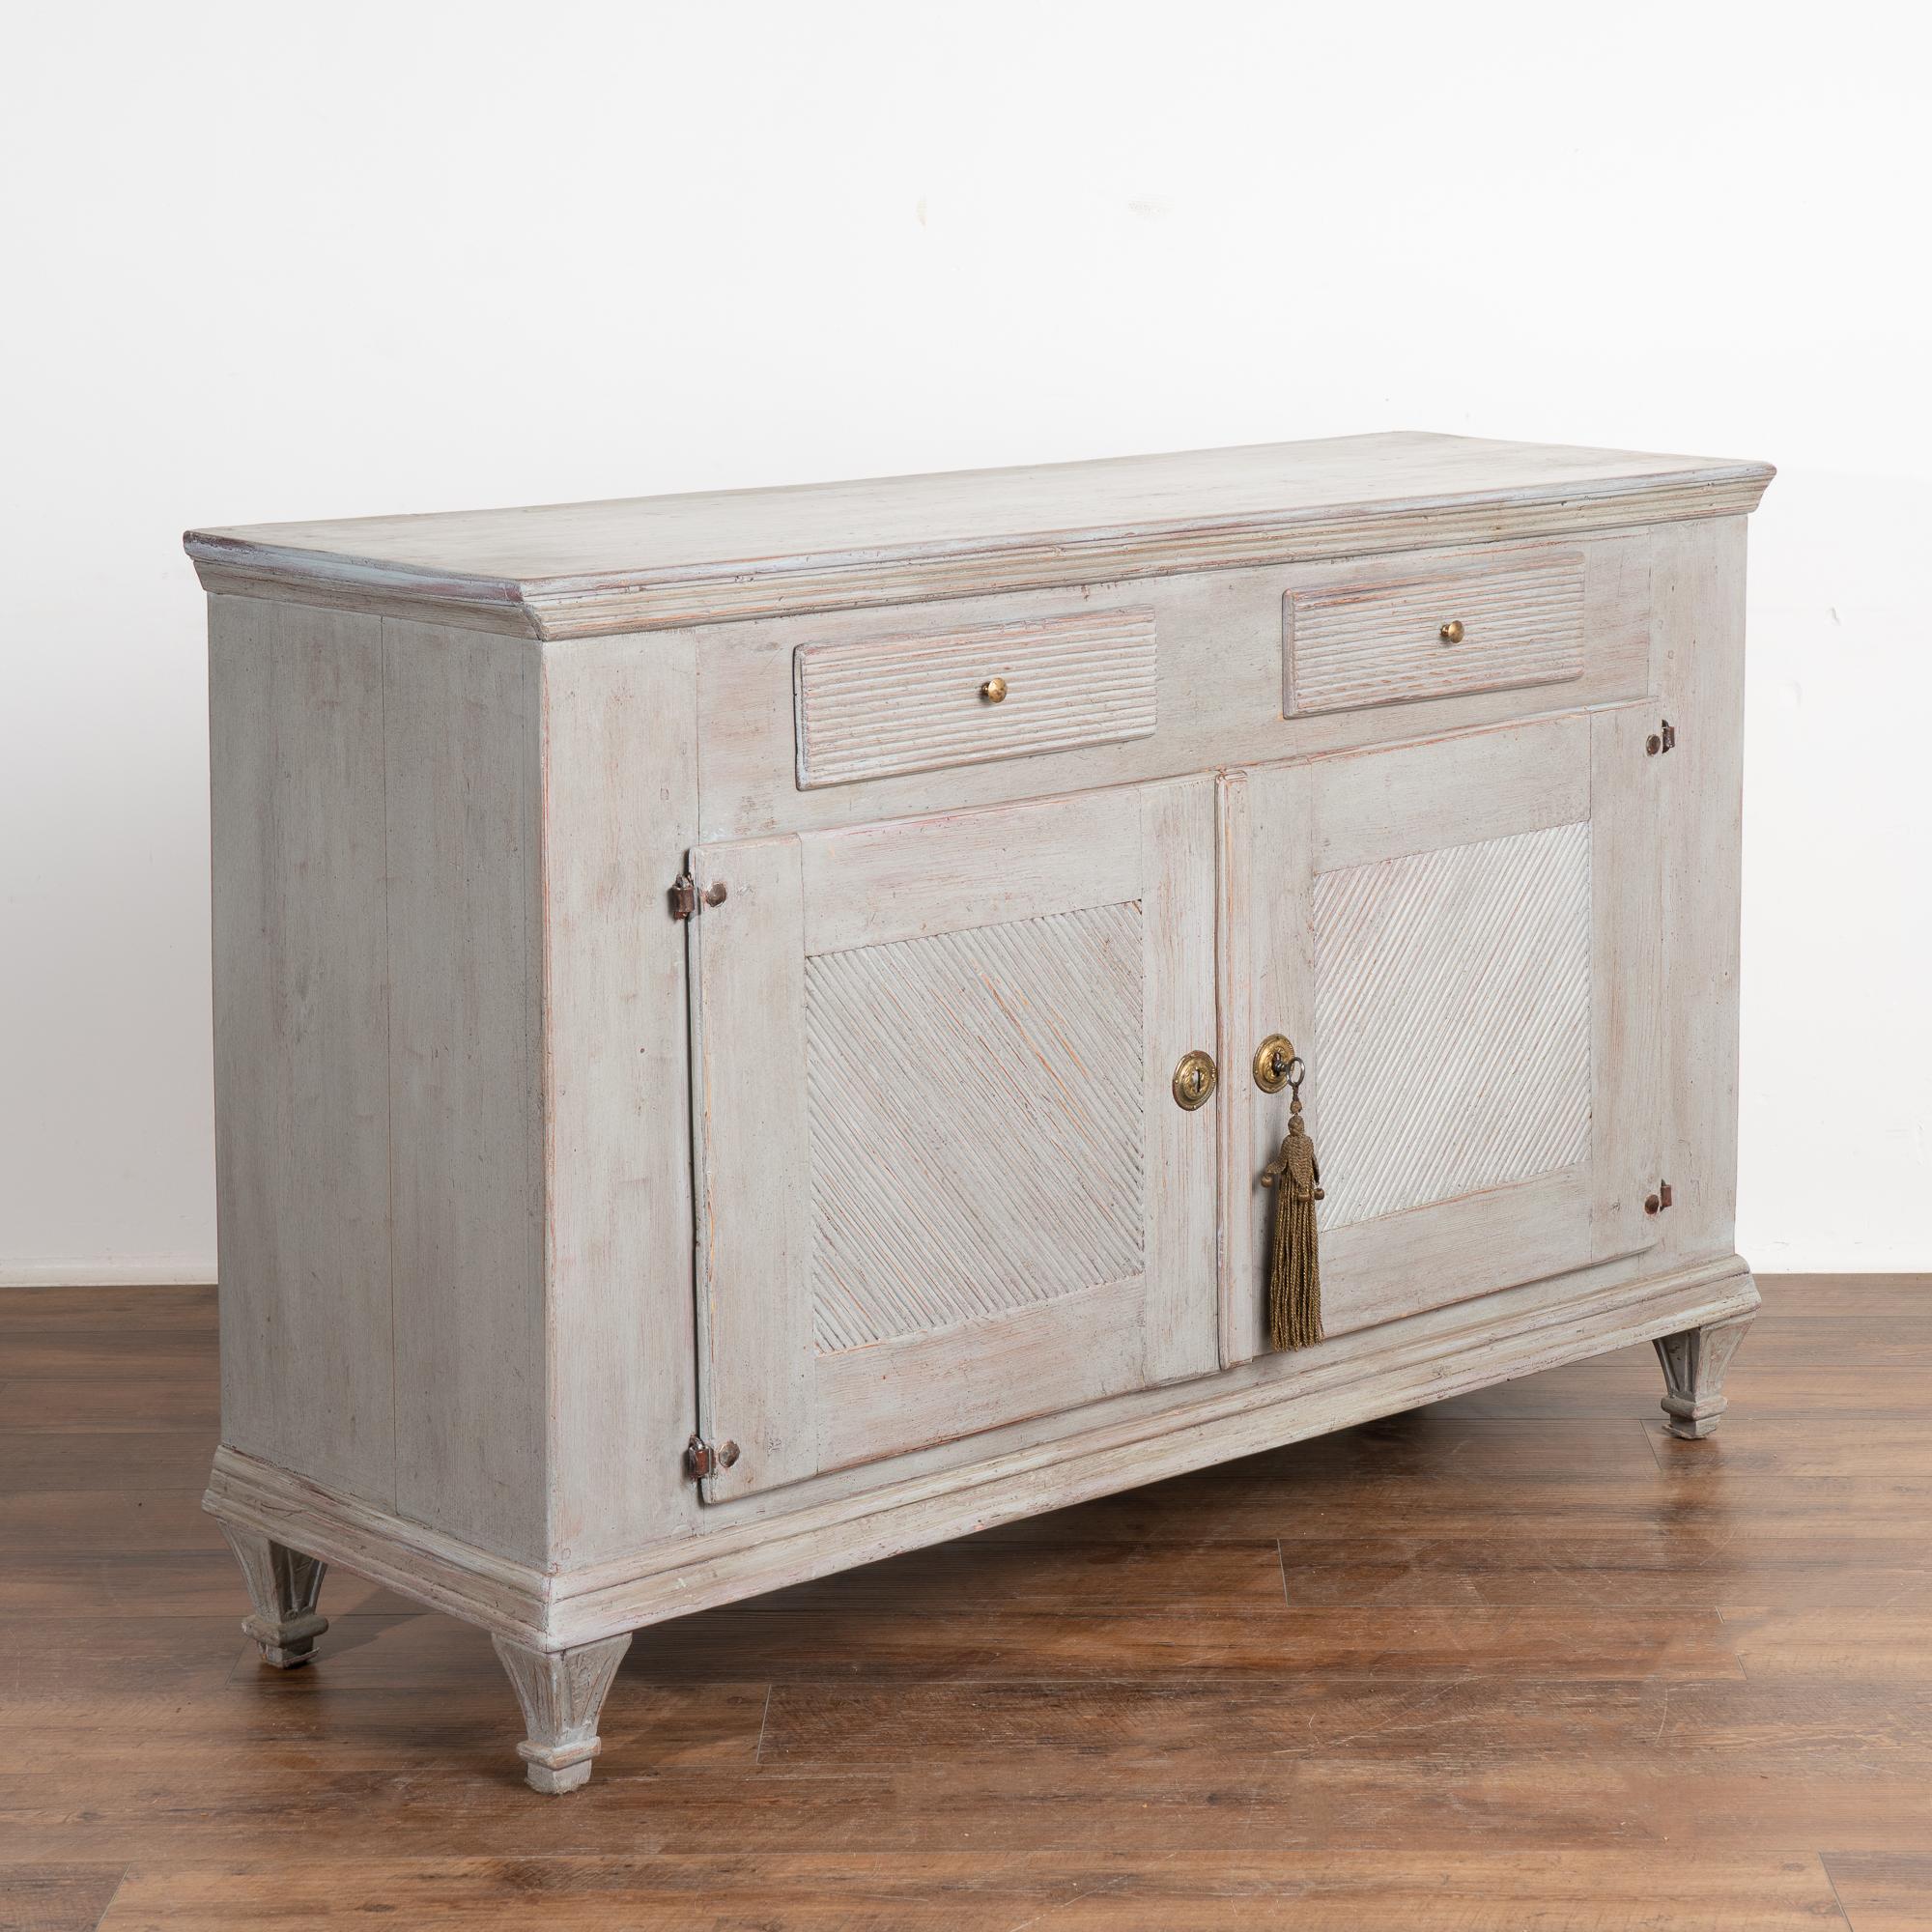 Swedish Gustavian gray painted pine sideboard with two drawers over two cabinet doors resting on tapered fluted feet.
The newer professionally applied soft gray painted finish beautifully compliments the age and grace of this buffet.
Original